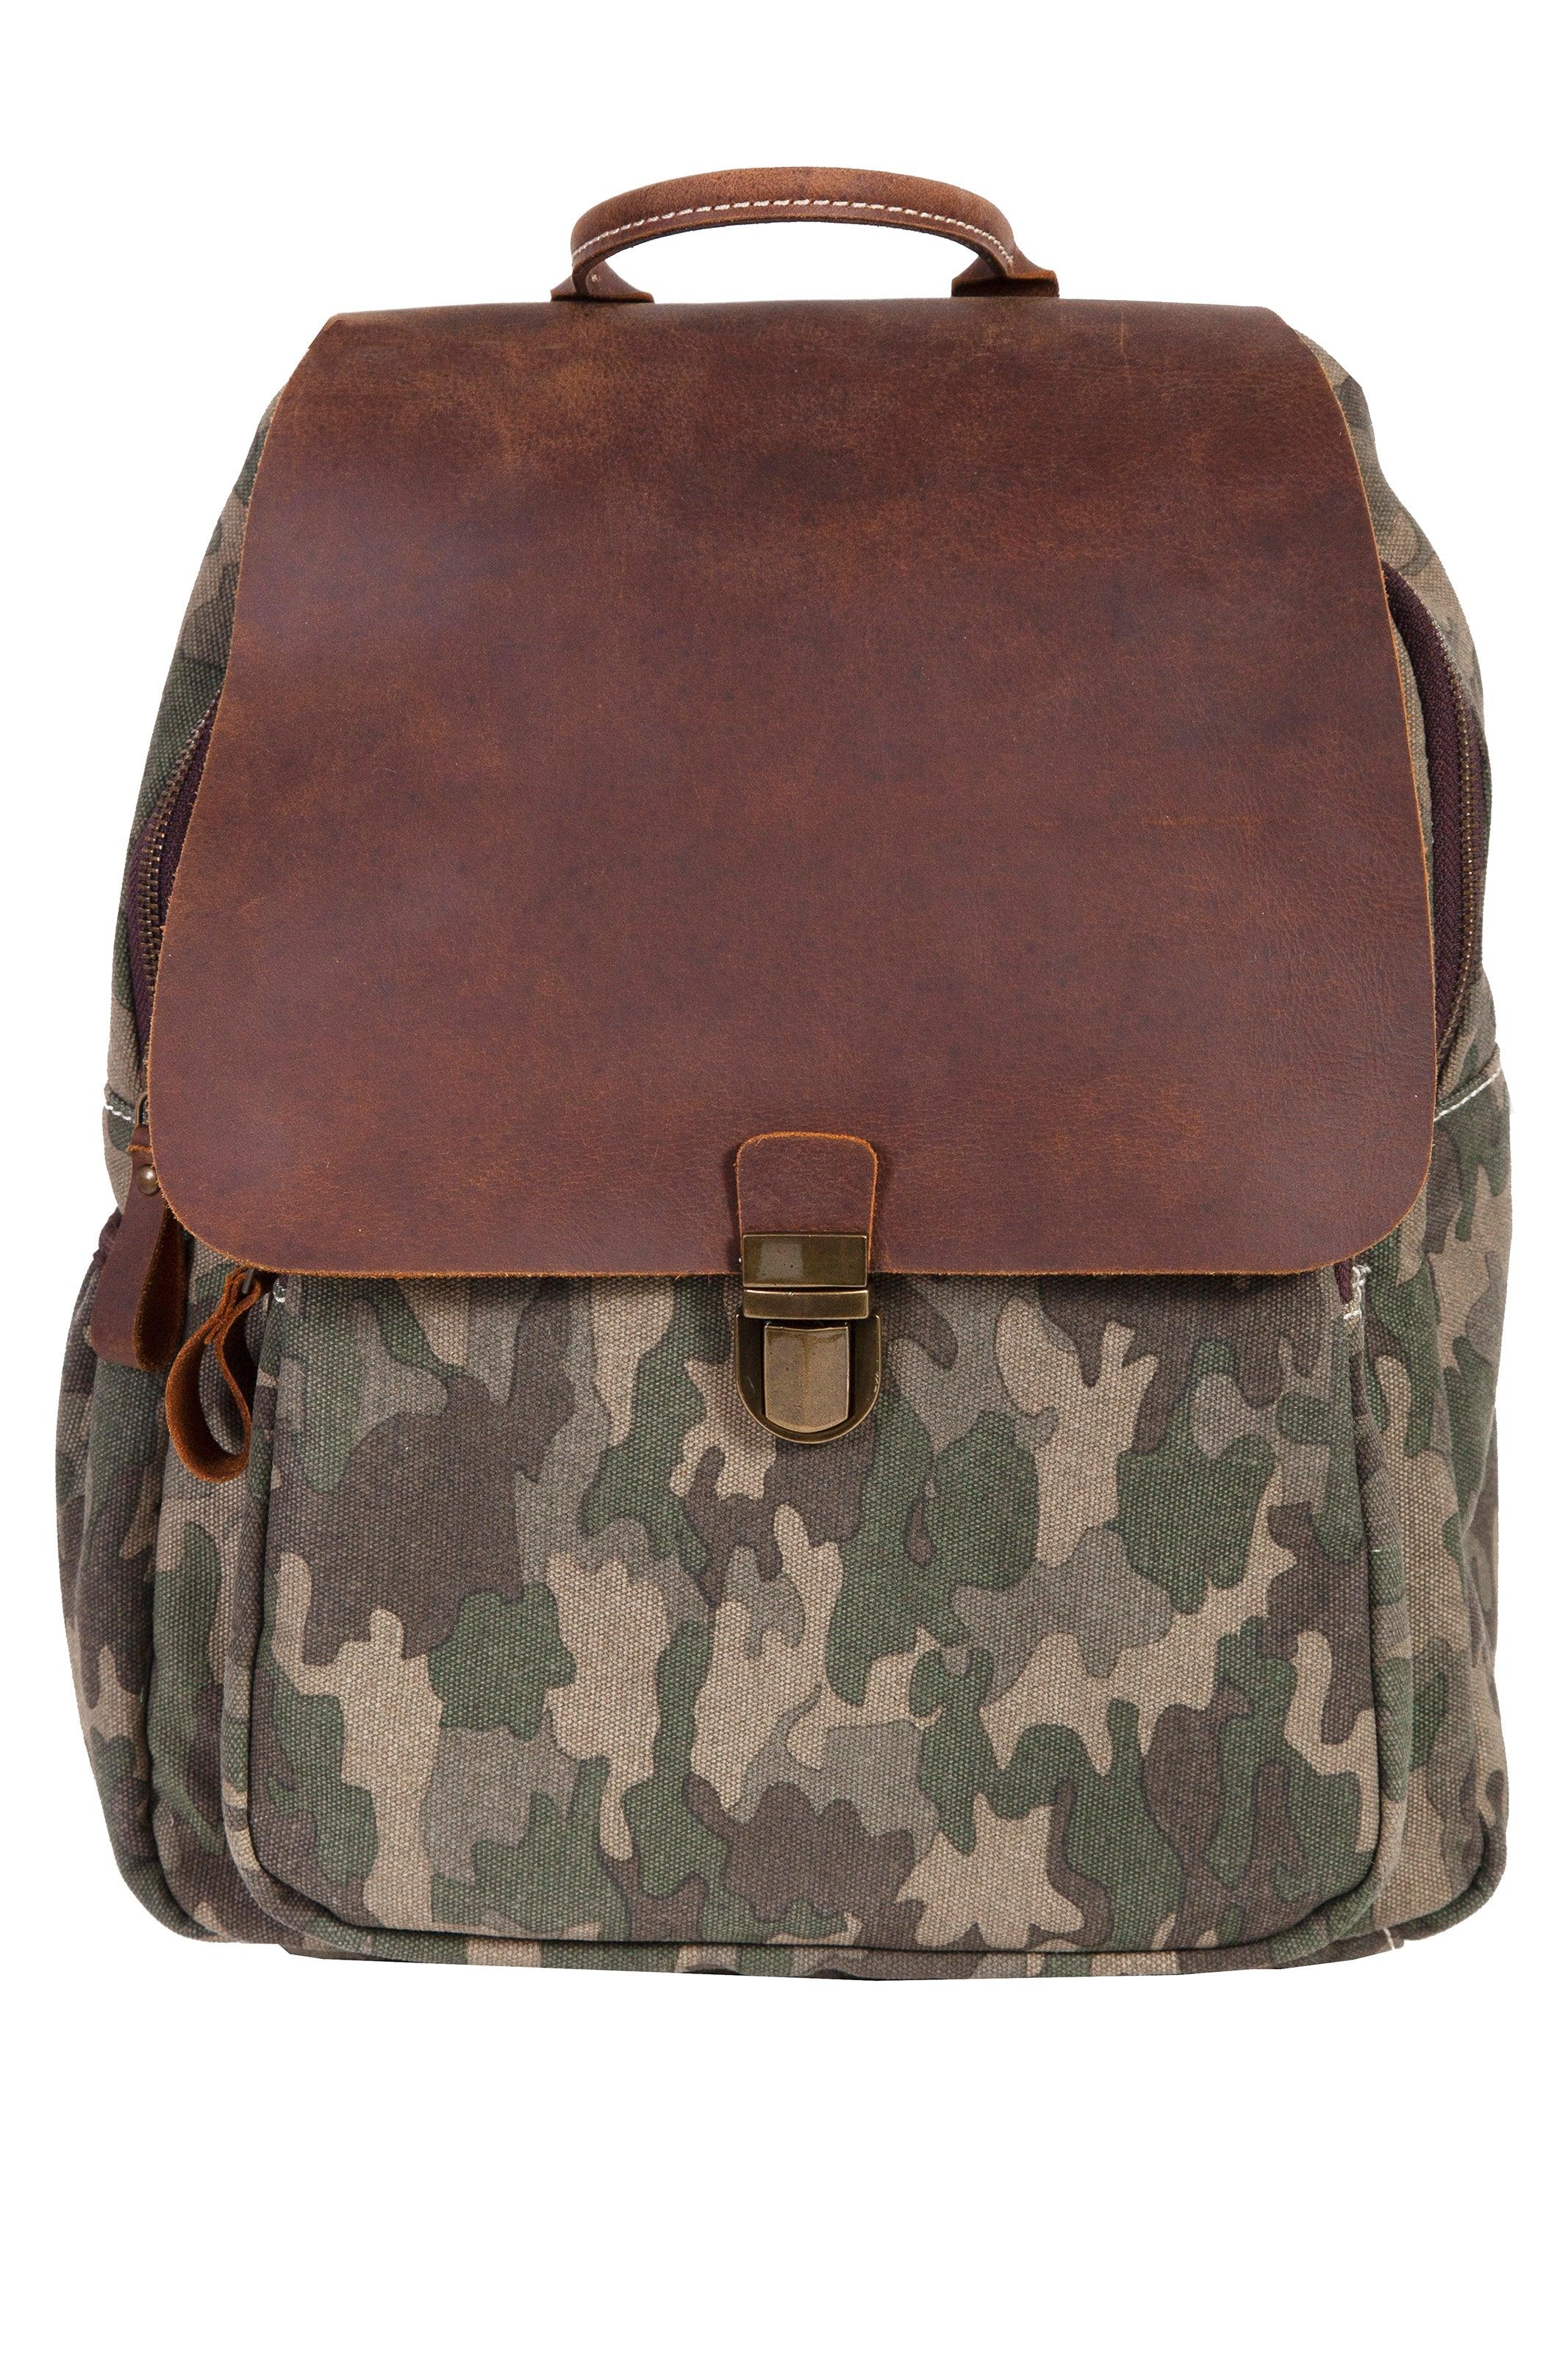 Scully CHOCOLATE CAMO BACKPACK - Flyclothing LLC